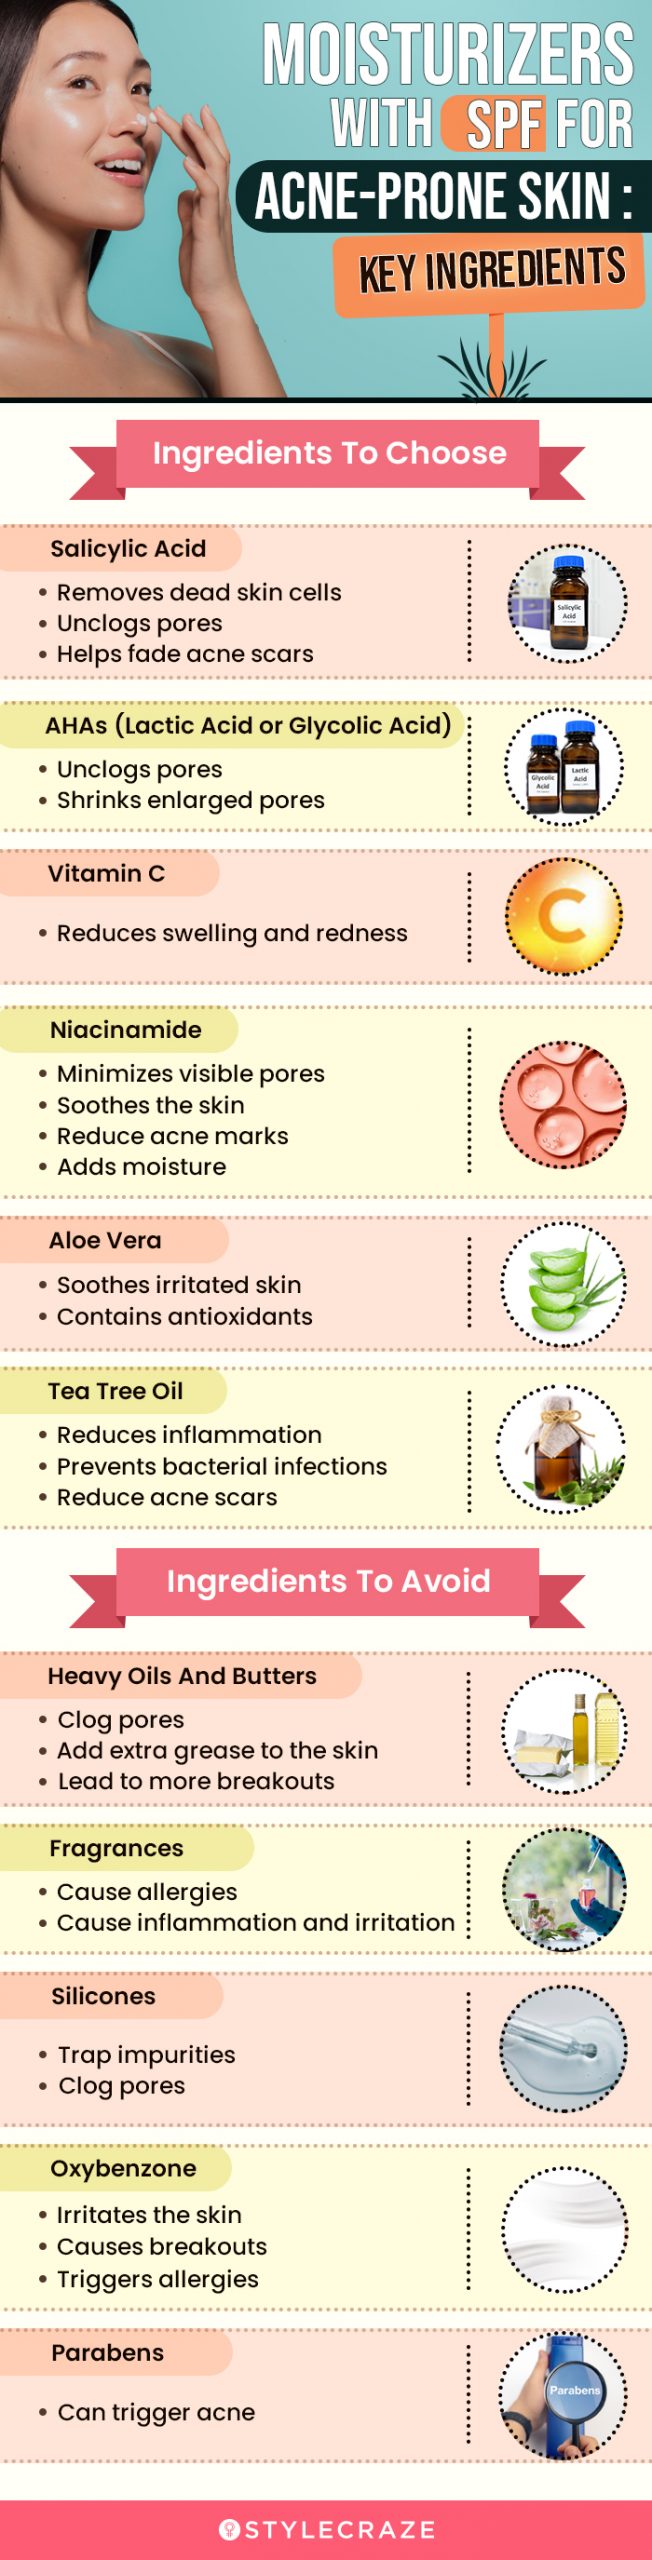 Moisturizer With SPF For Acne Prone Skin: Key Ingredients (infographic)